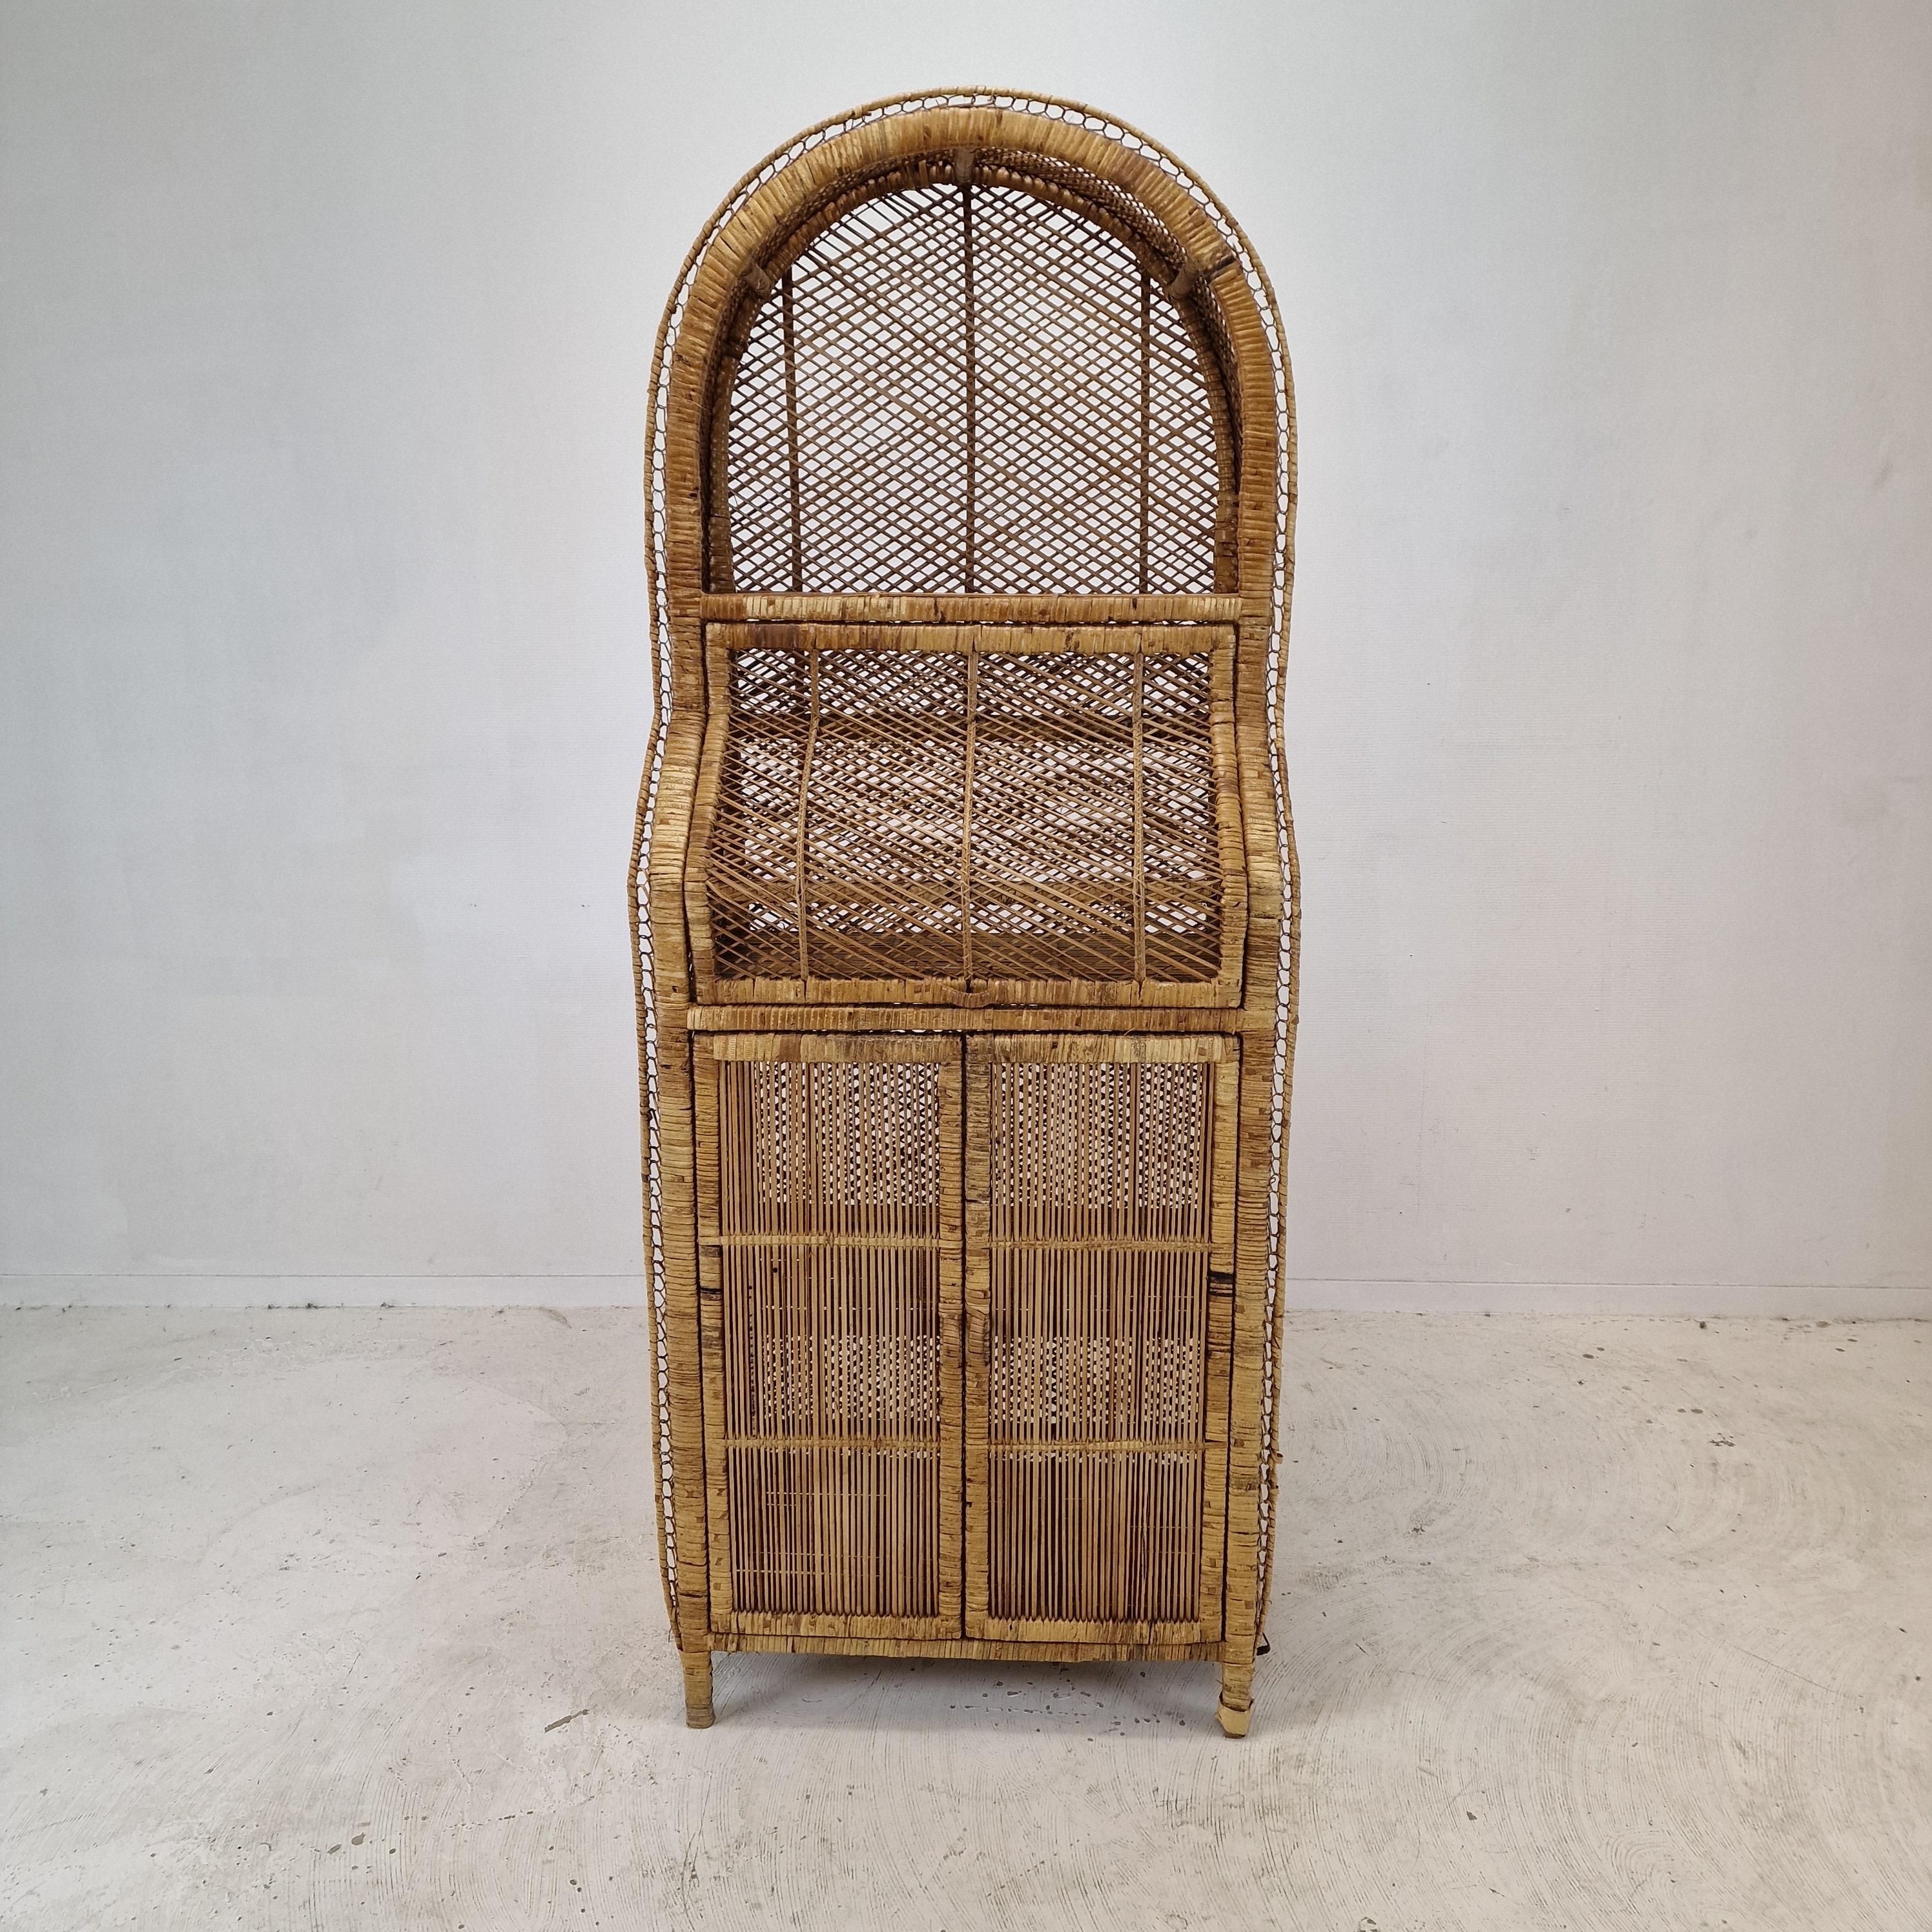 Lovely credenza or bookcase, fabricated in Italy in the 70's. 
This very nice credenza is made of bamboo and rattan.

It has two doors on the lower part and a fall flap opening in the middle part.

We work with professional packers and shippers, we